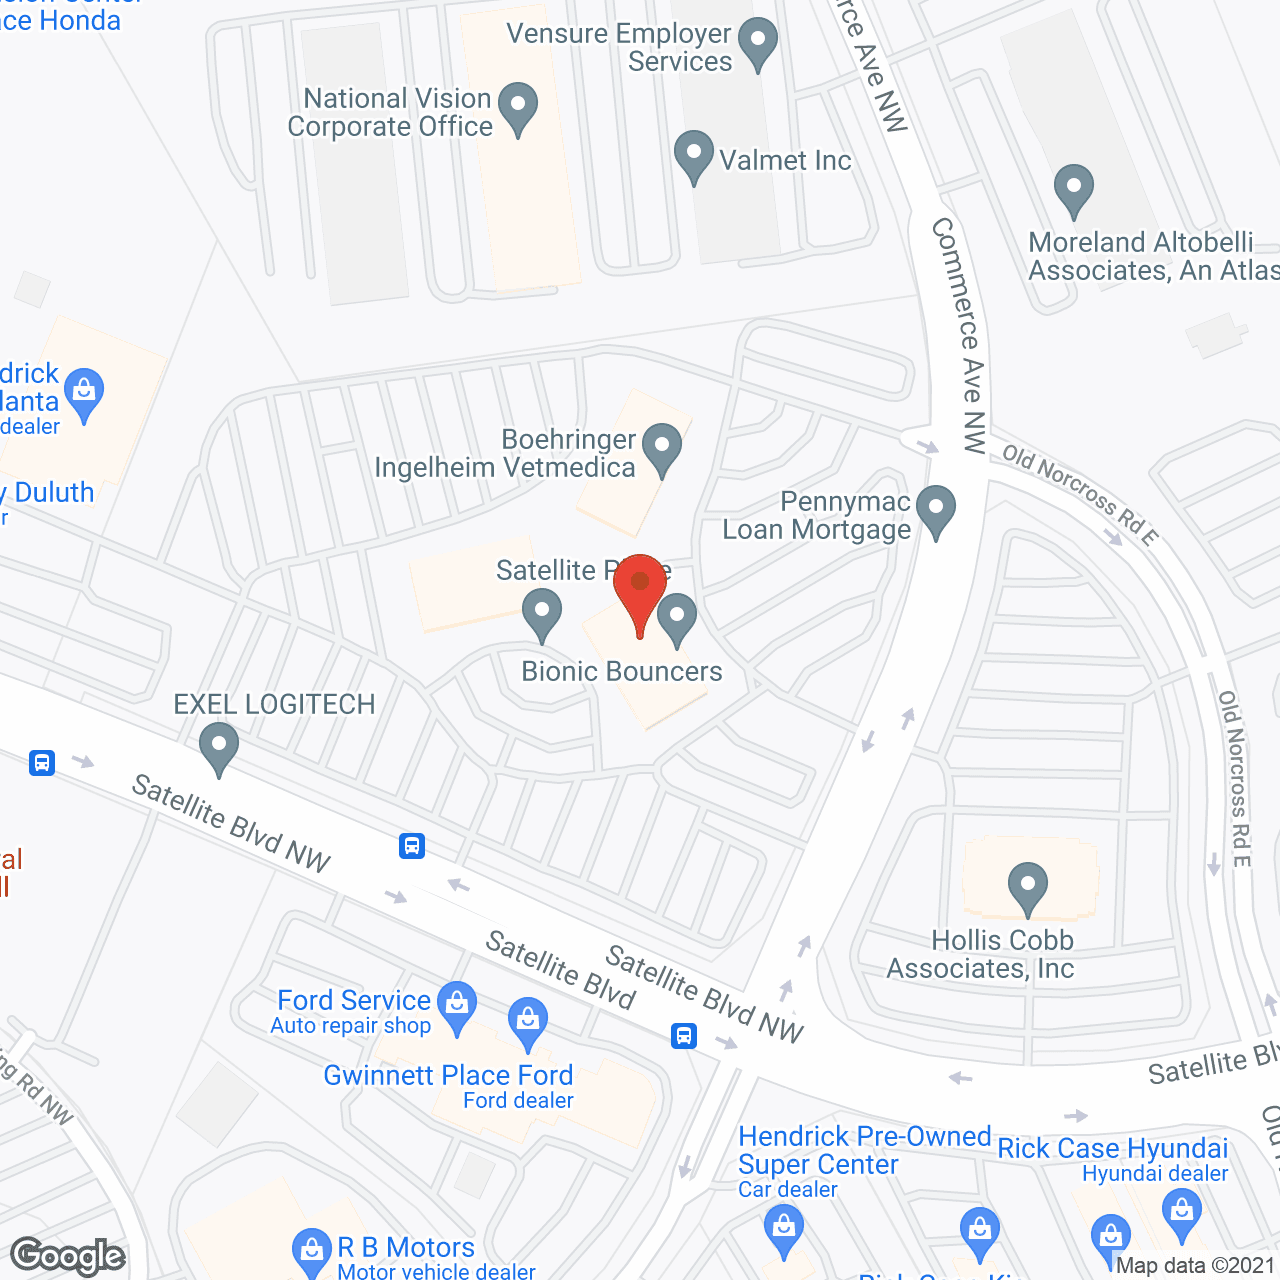 Dignity Care Services in google map